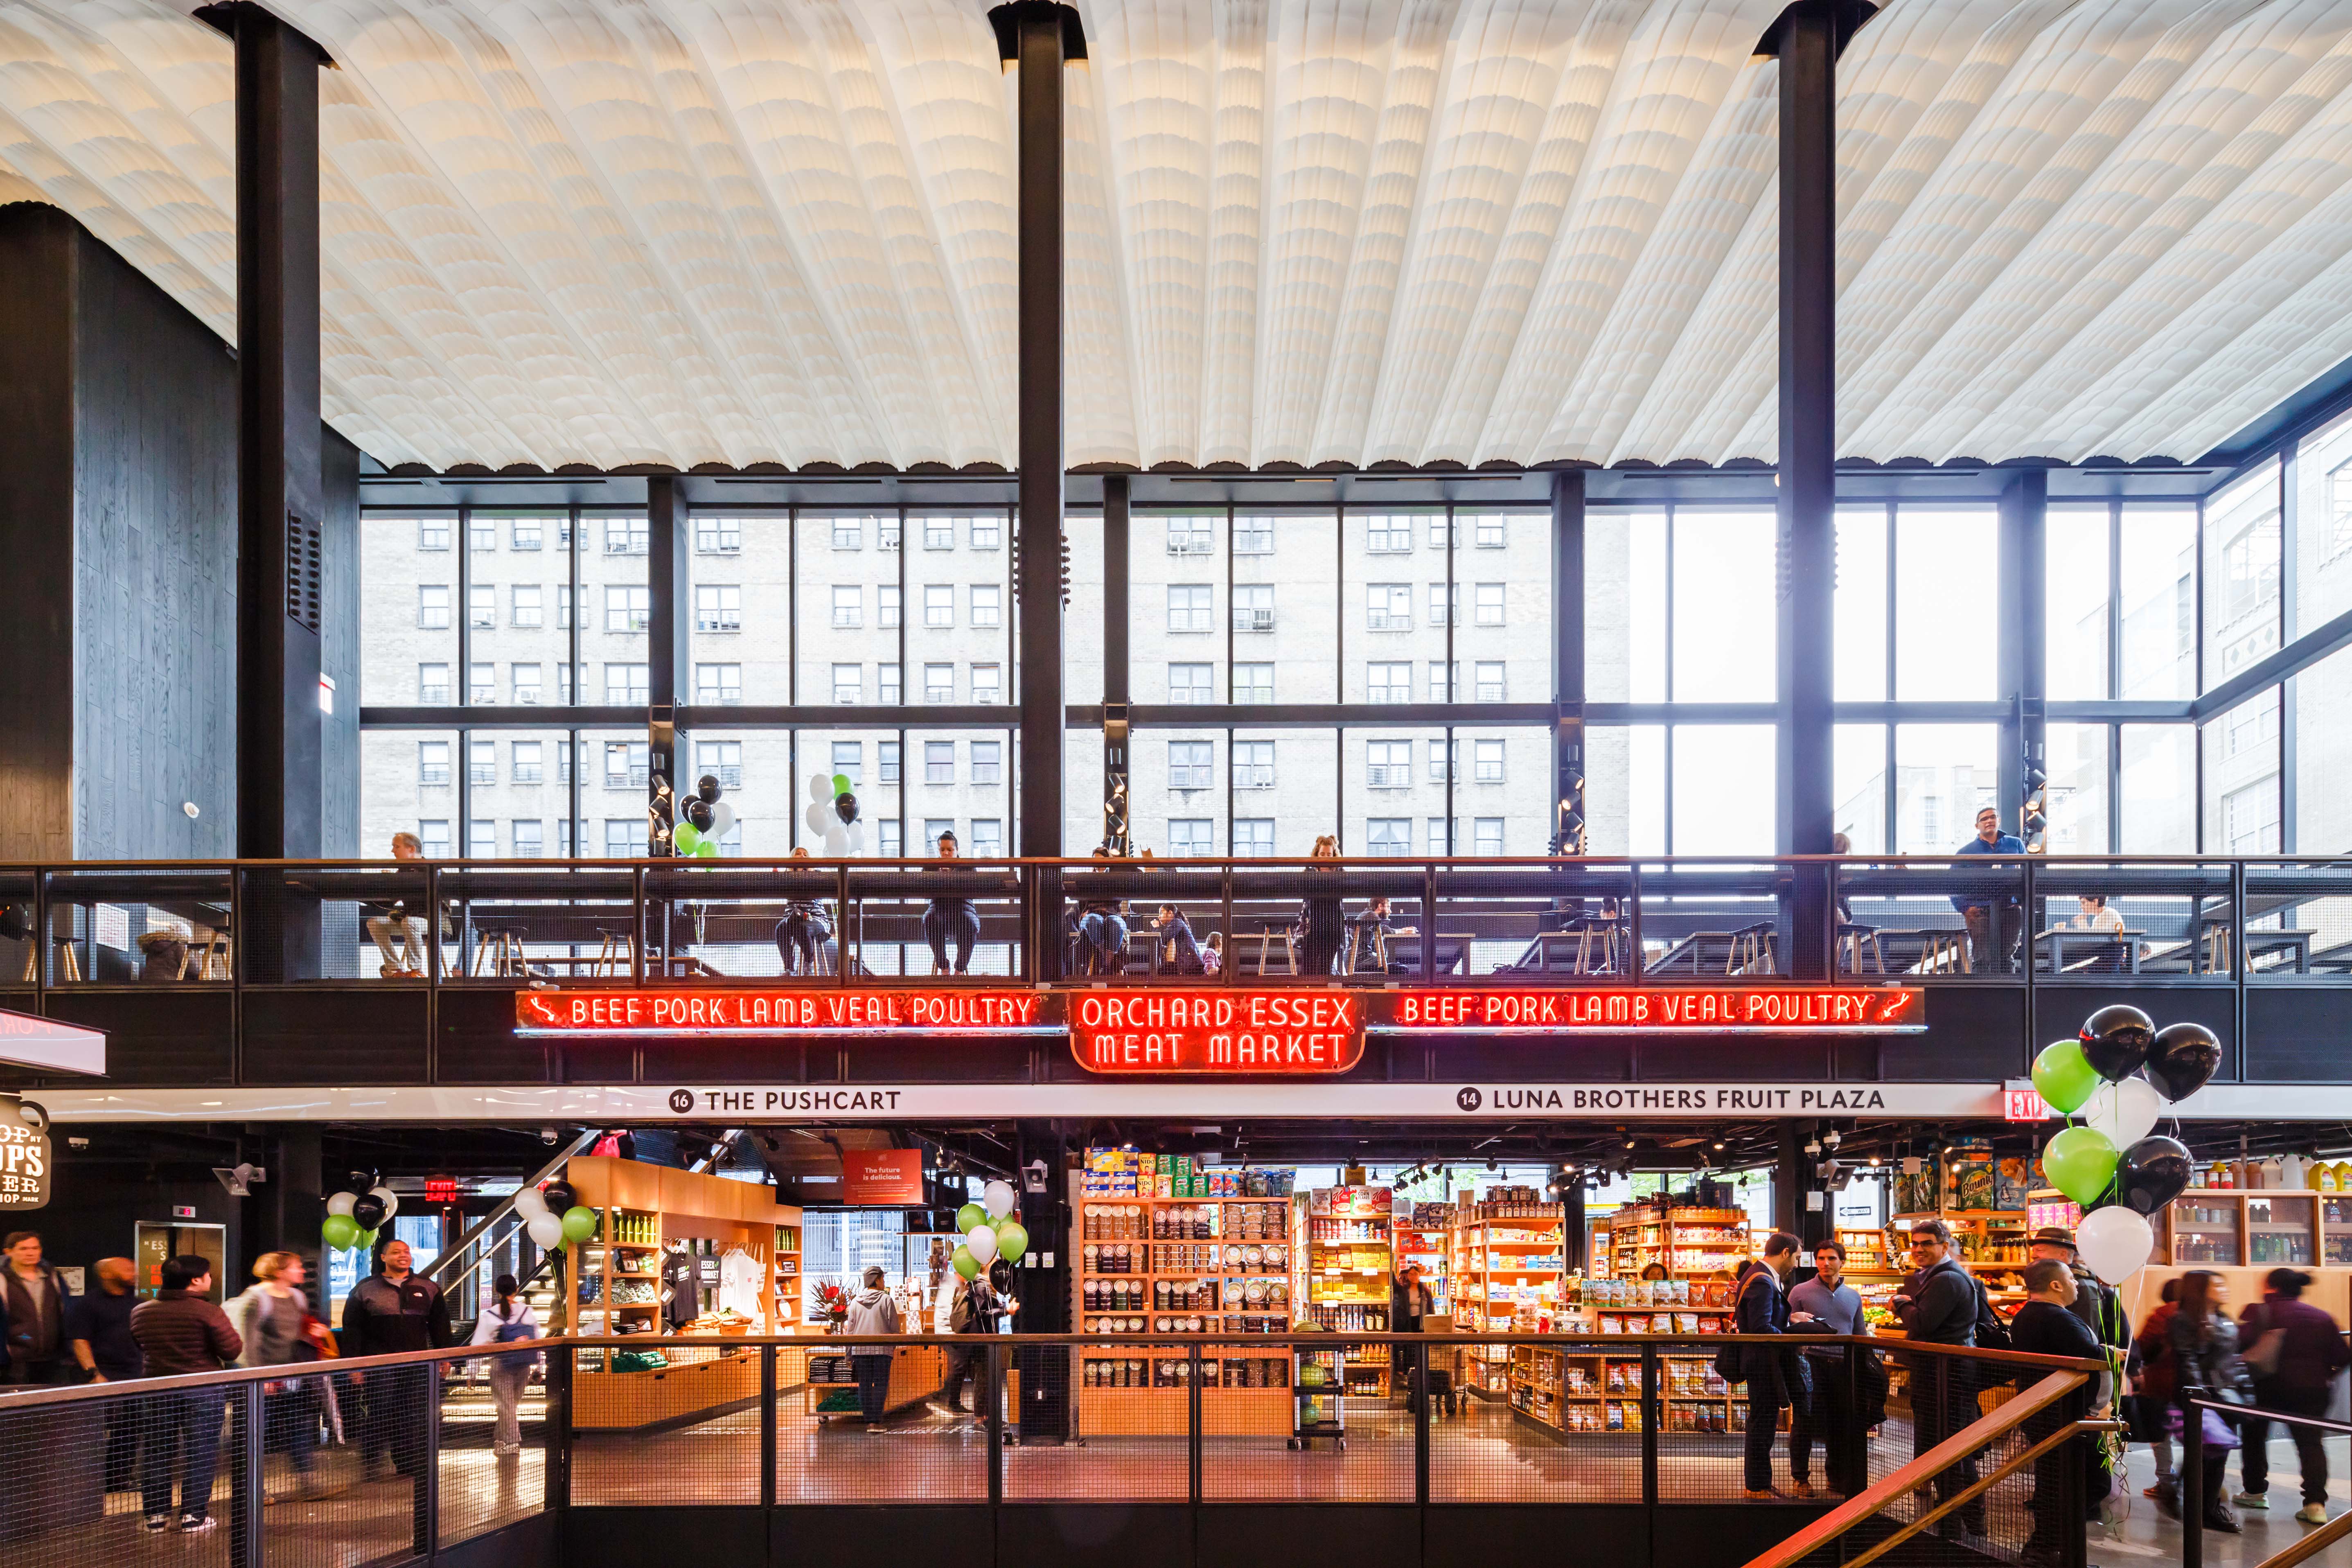 A huge food hall with floor-to-ceiling windows and a top floor of dining area